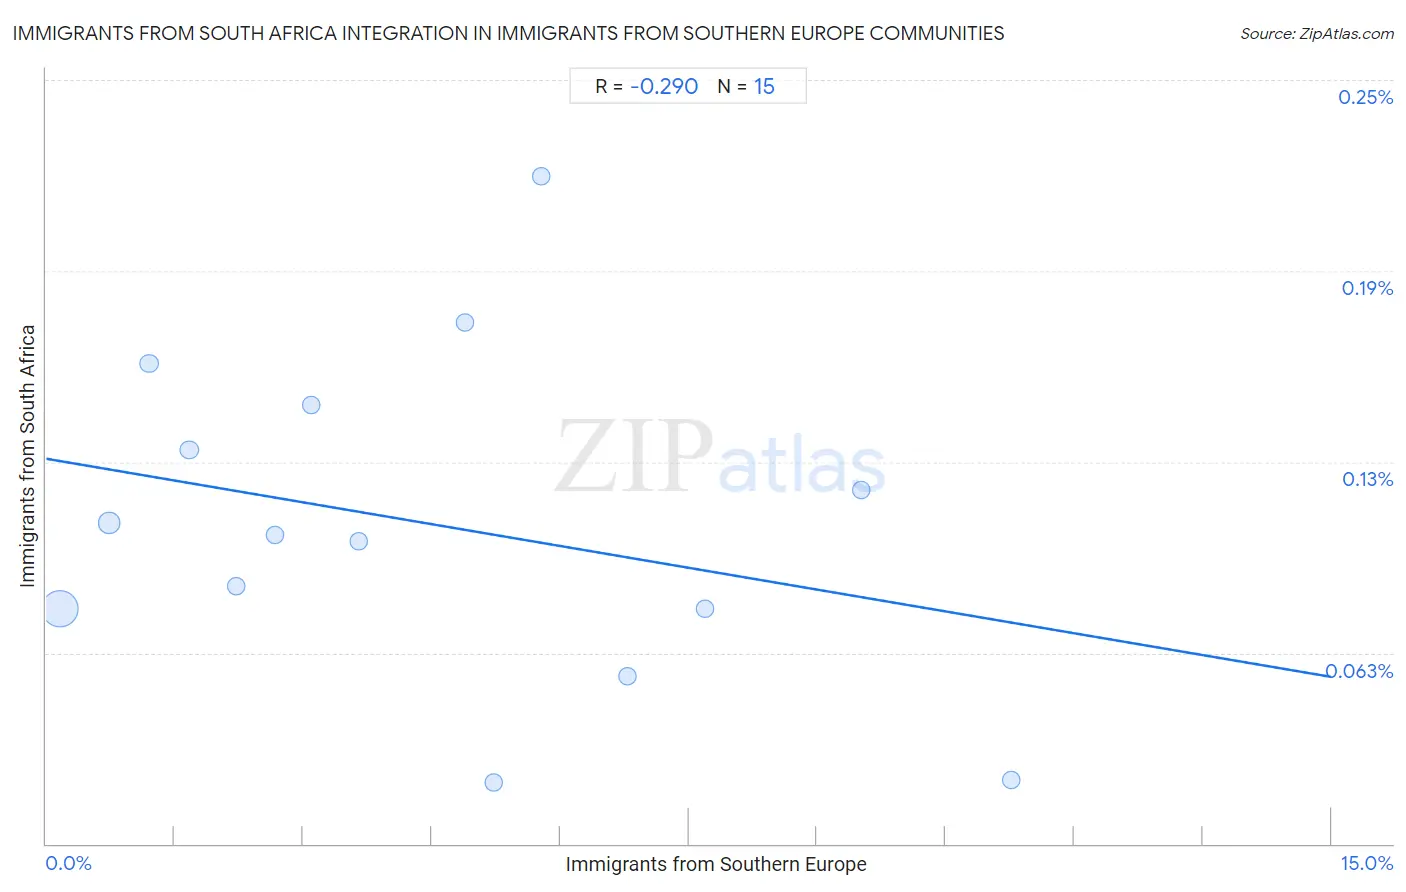 Immigrants from Southern Europe Integration in Immigrants from South Africa Communities